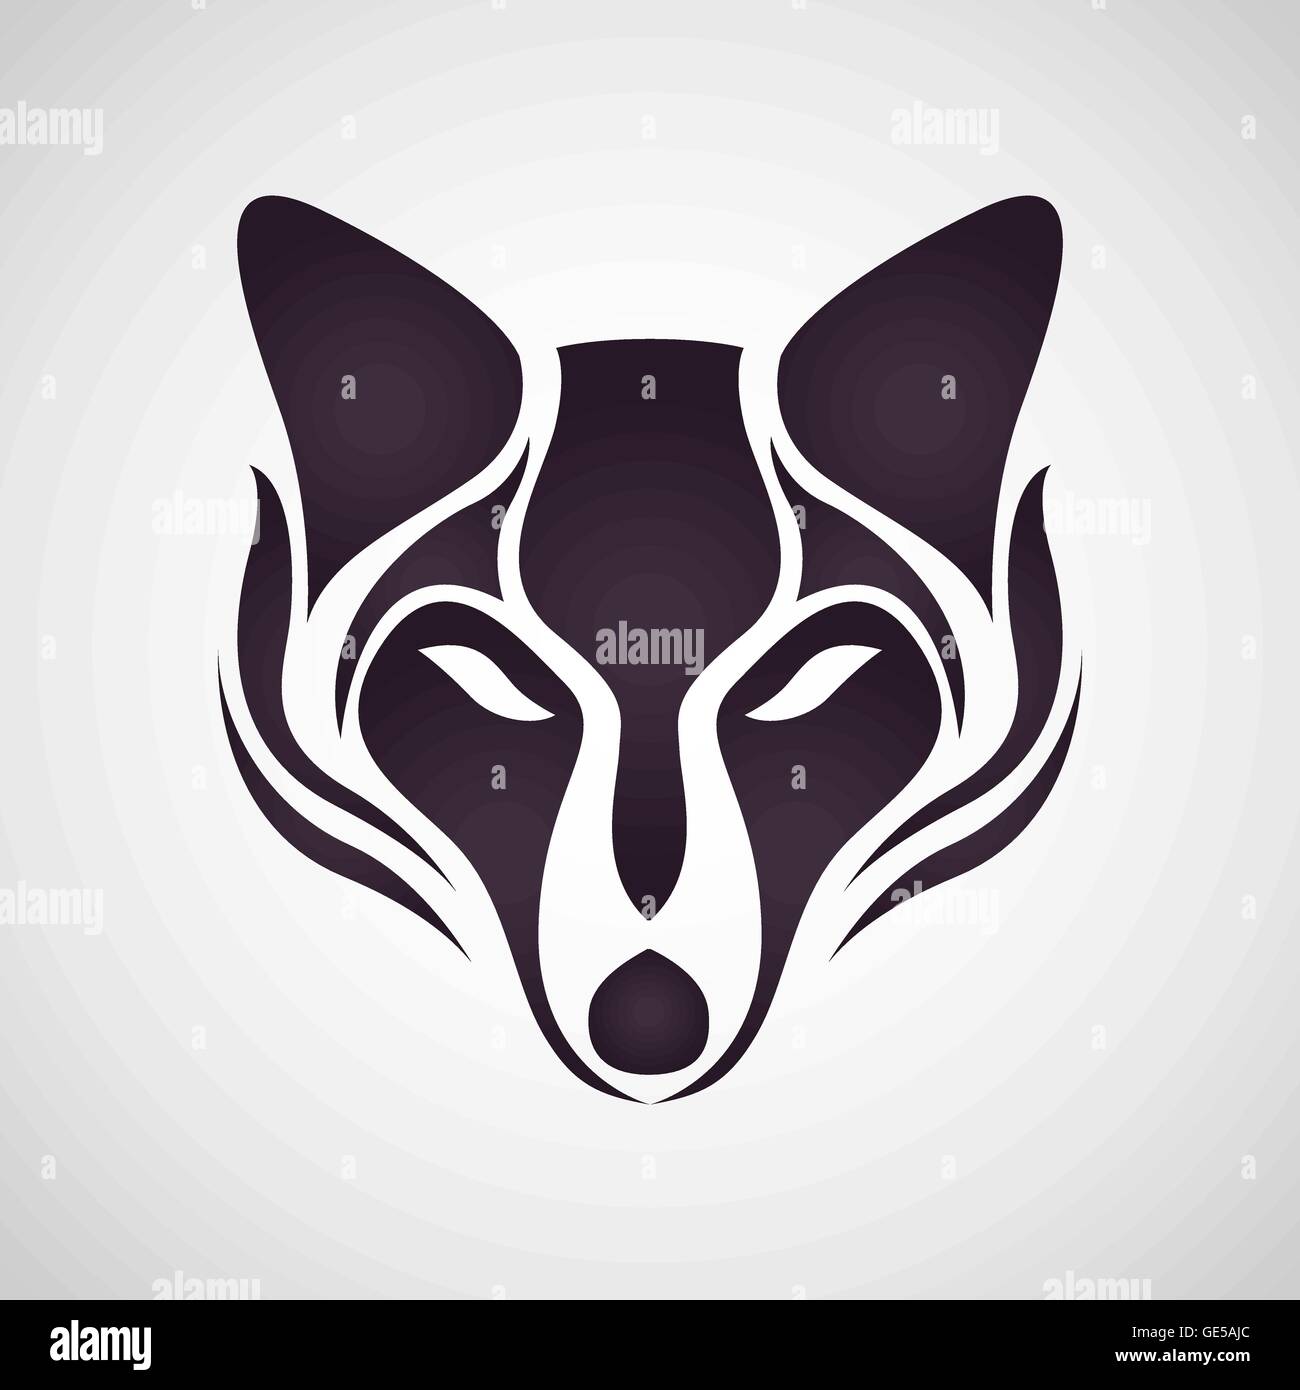 Fox Logo High Resolution Stock Photography and Images - Alamy